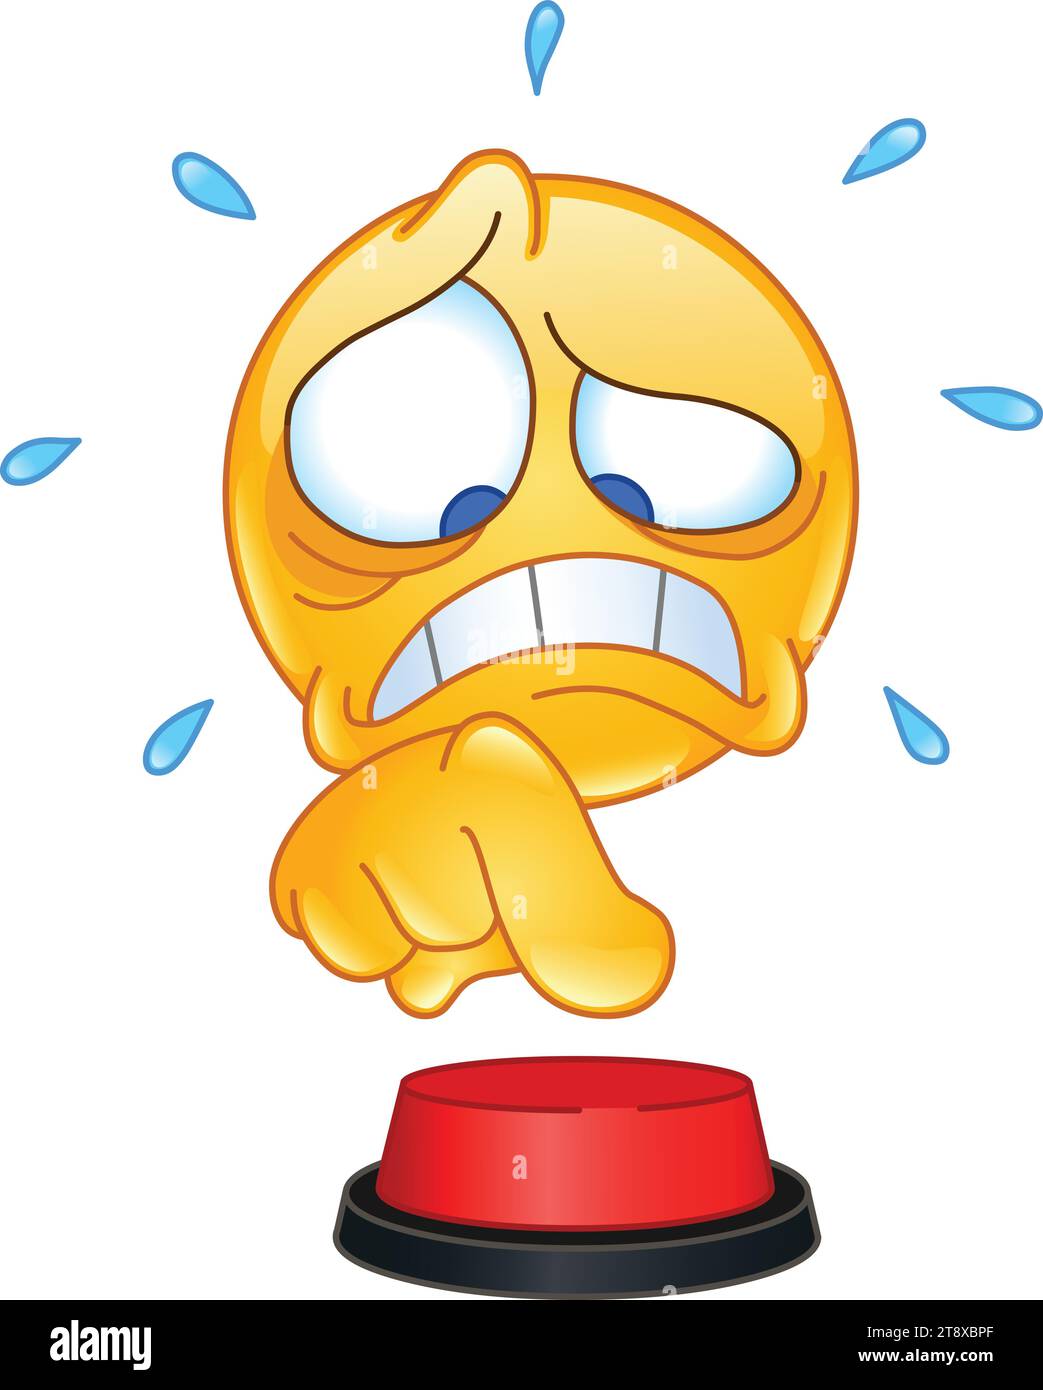 Stressed emoji emoticon about to push the red button Stock Vector